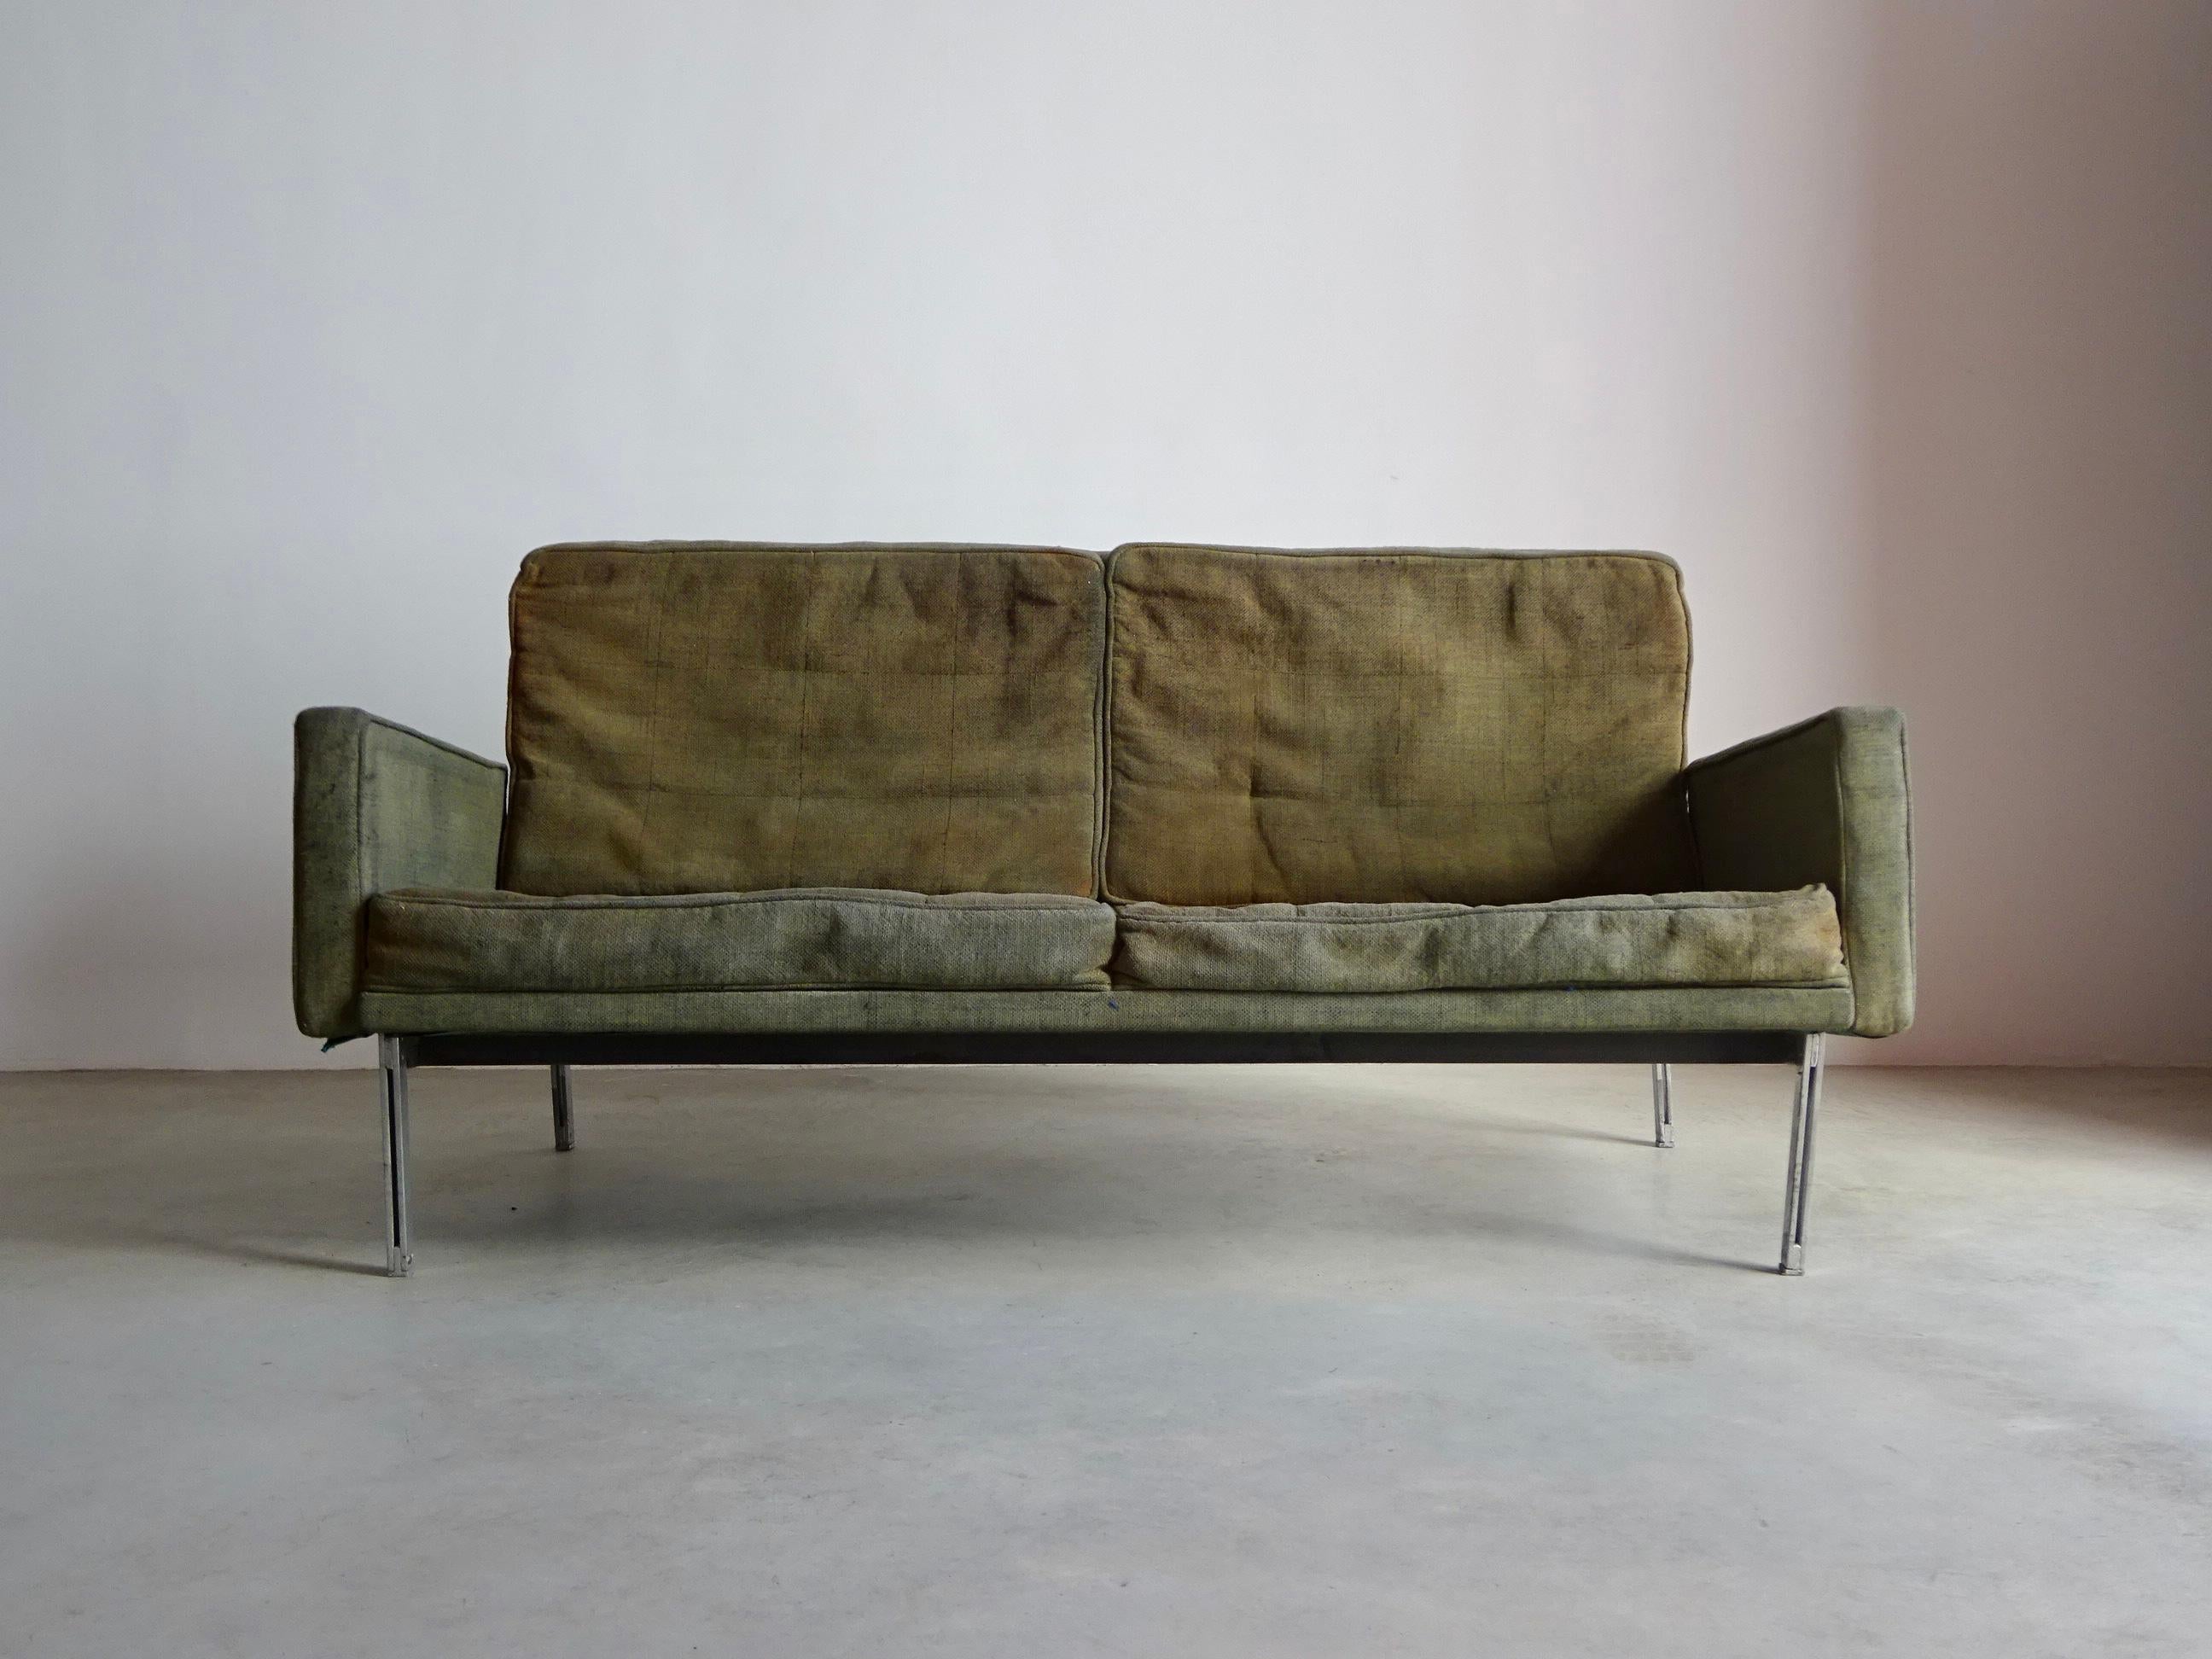 American Parallel Bar Sofa, Model 57, by Florence Knol, USA, 1960s. For Sale